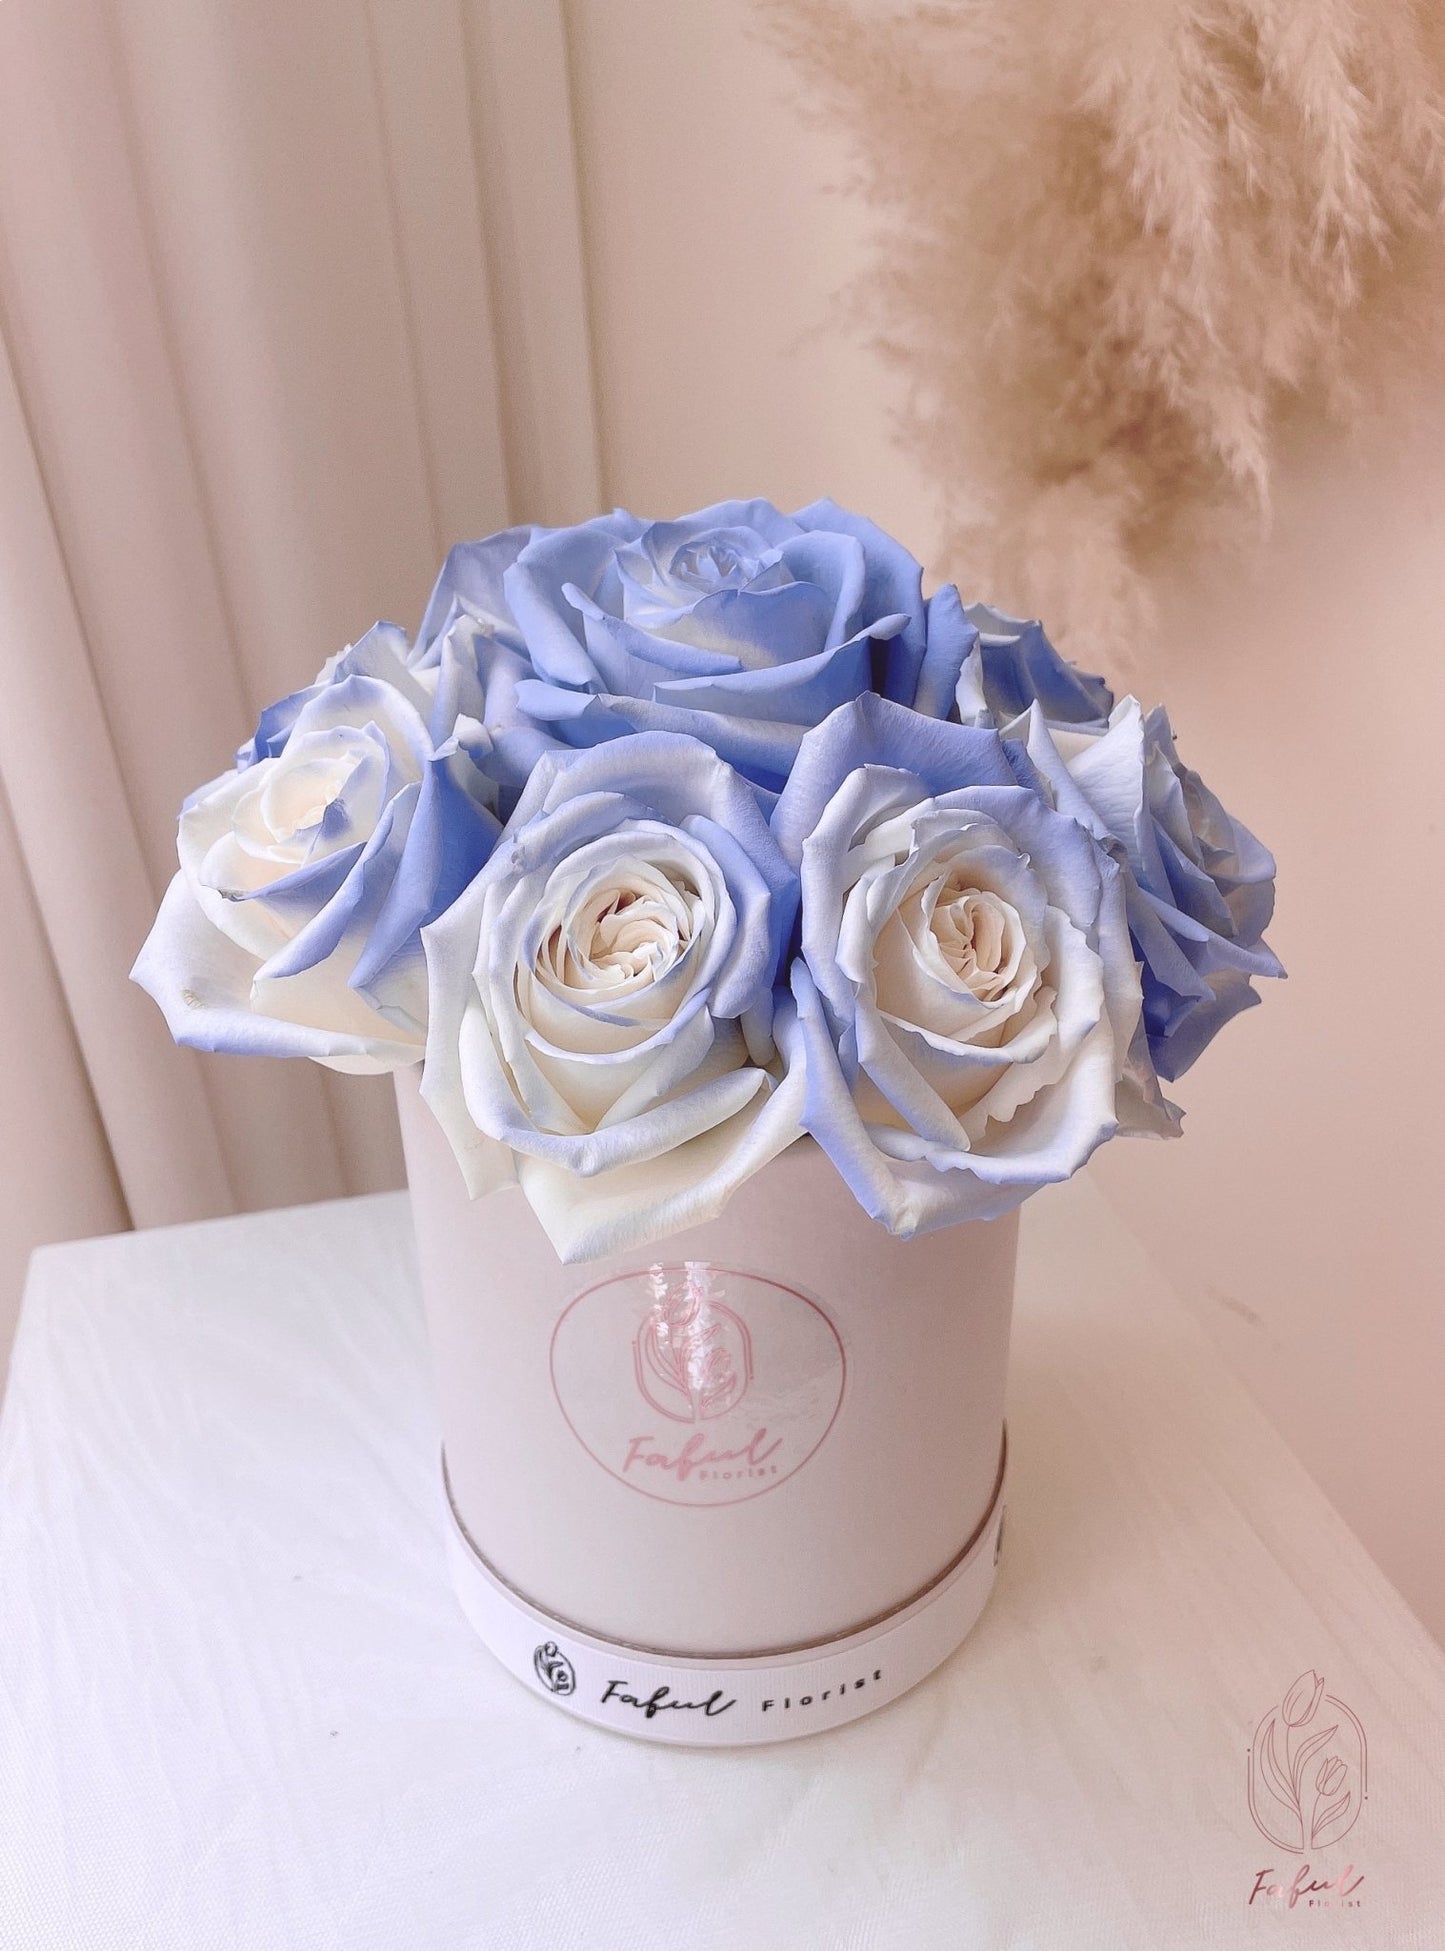  "Frozen Blue Rose Flowers" - A mesmerizing flower box featuring stunning blue roses, perfect flowers for flower delivery in Hong Kong.